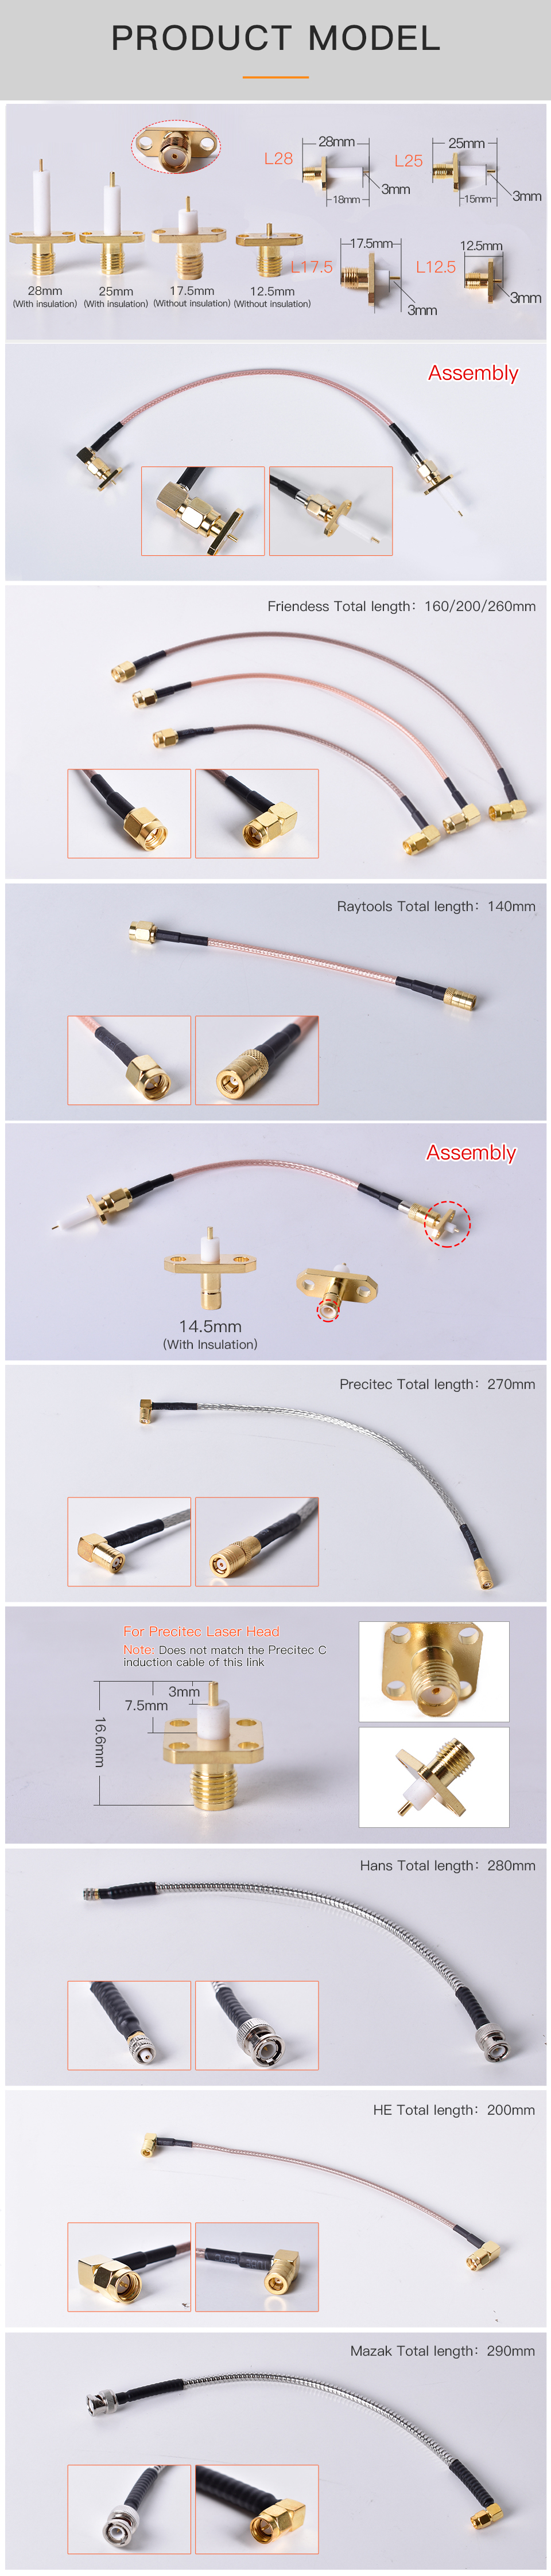 laser head RF cable